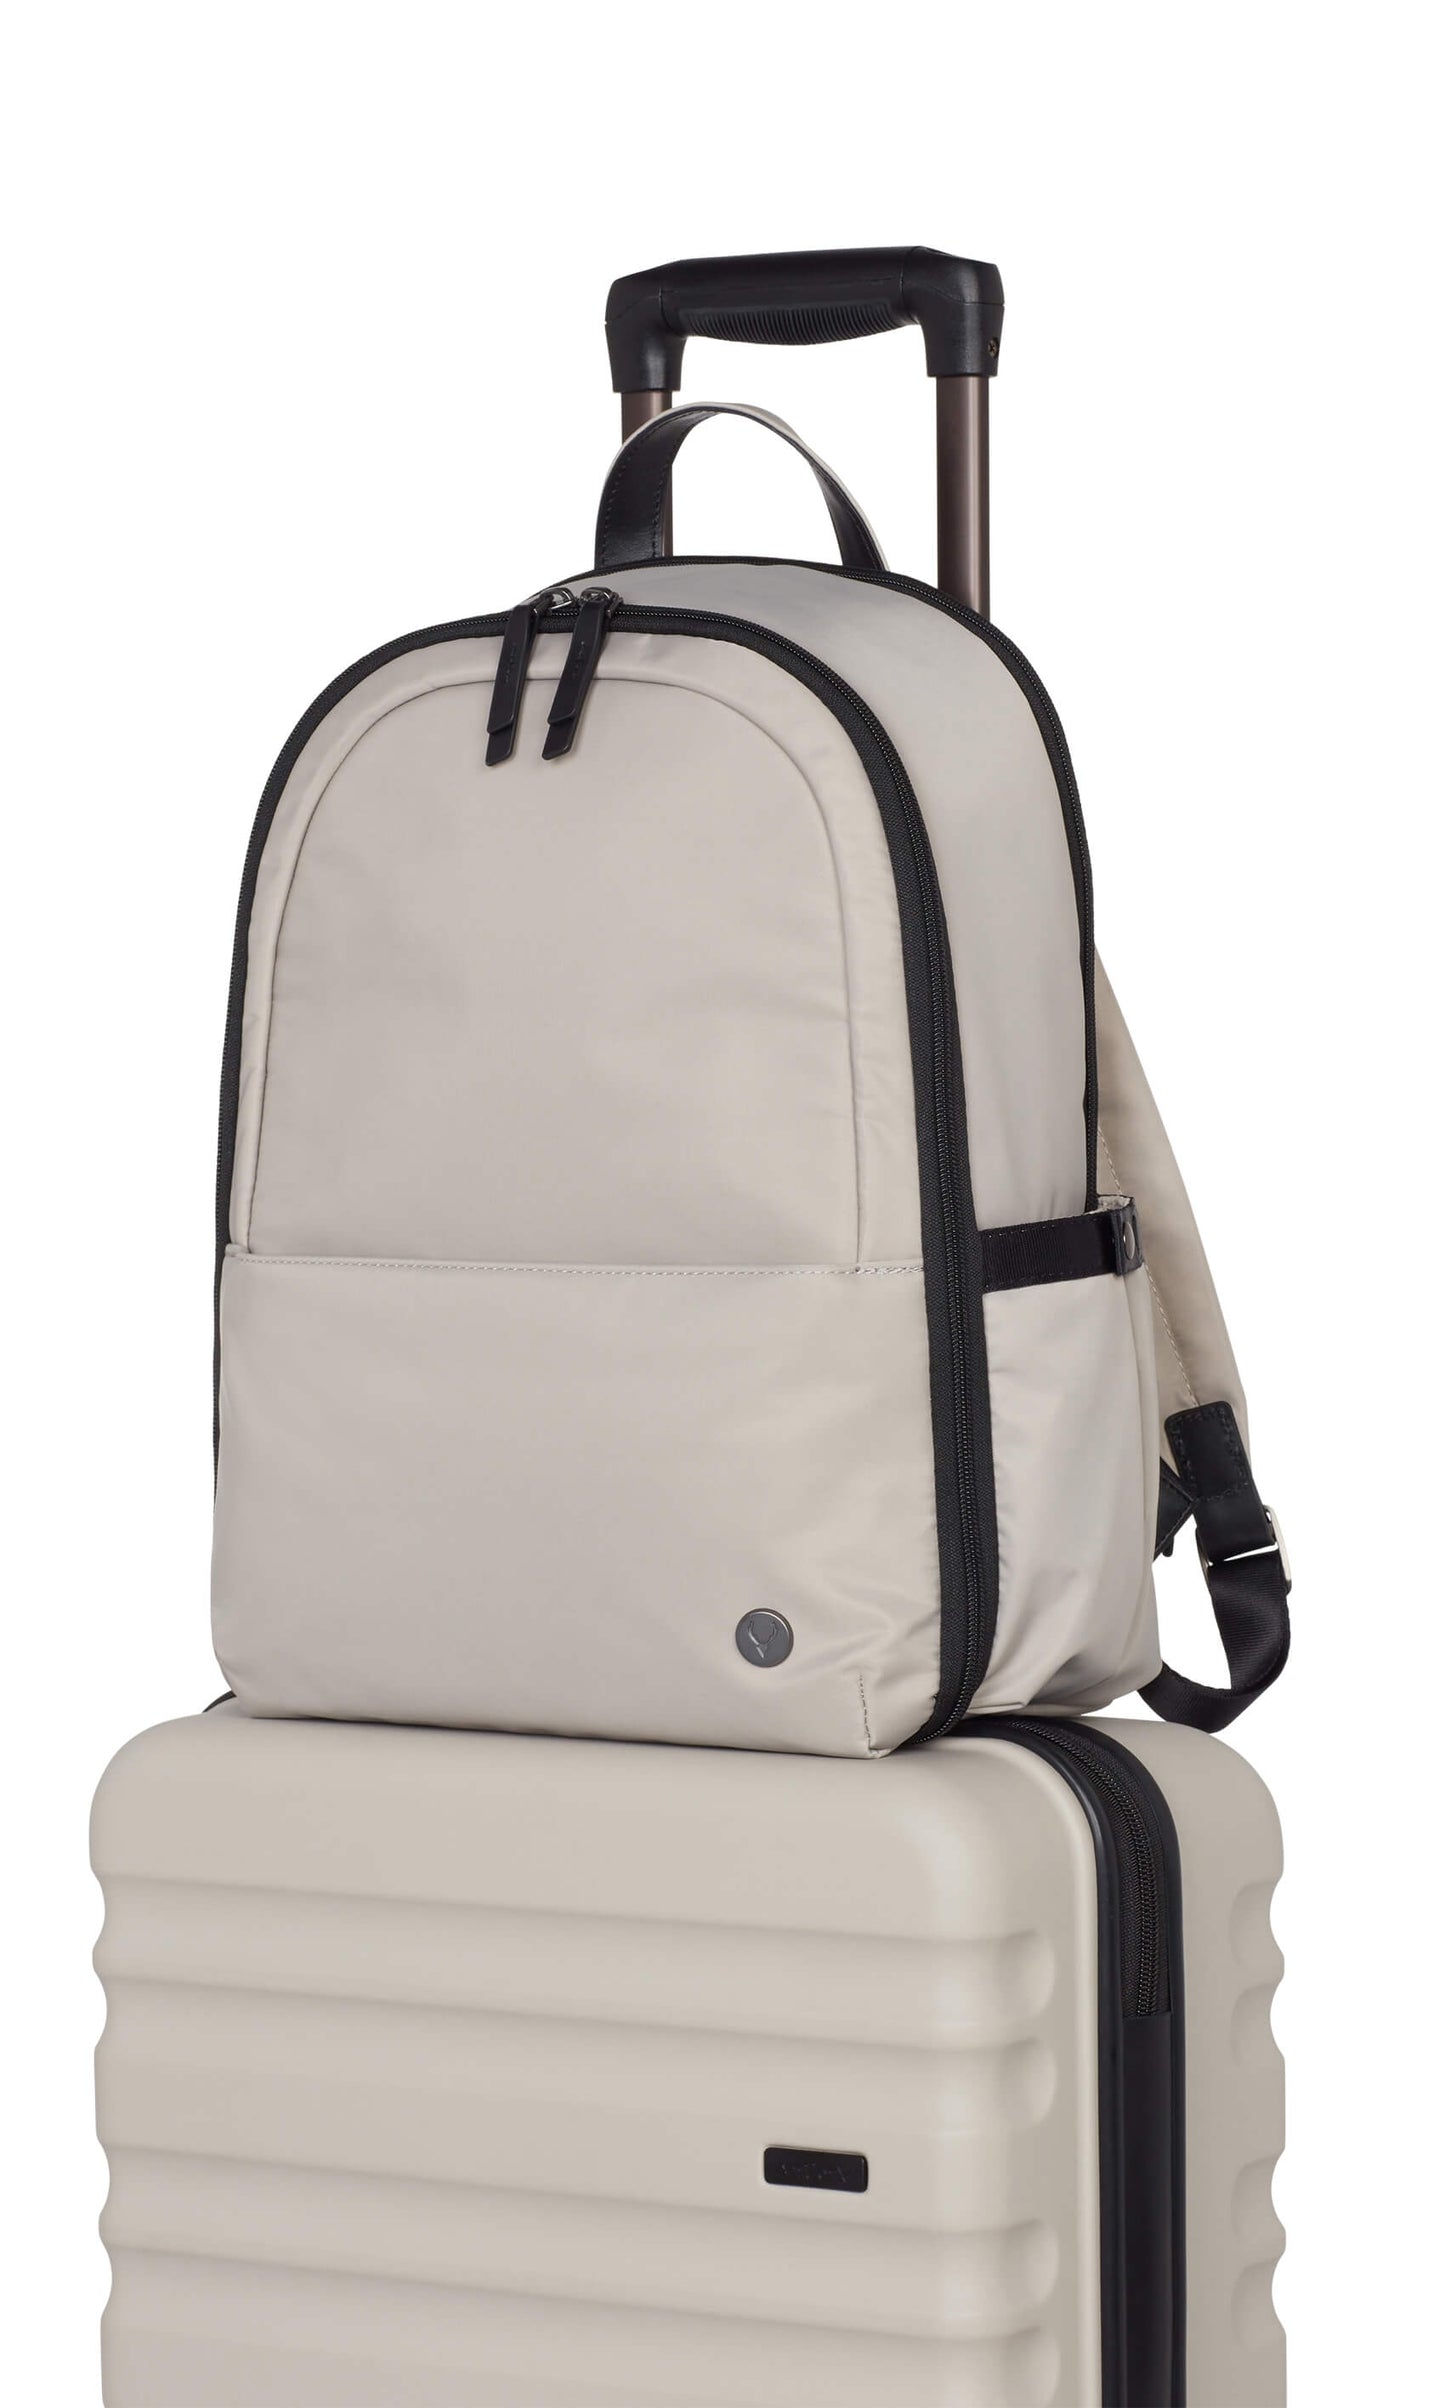 Chelsea backpack in taupe